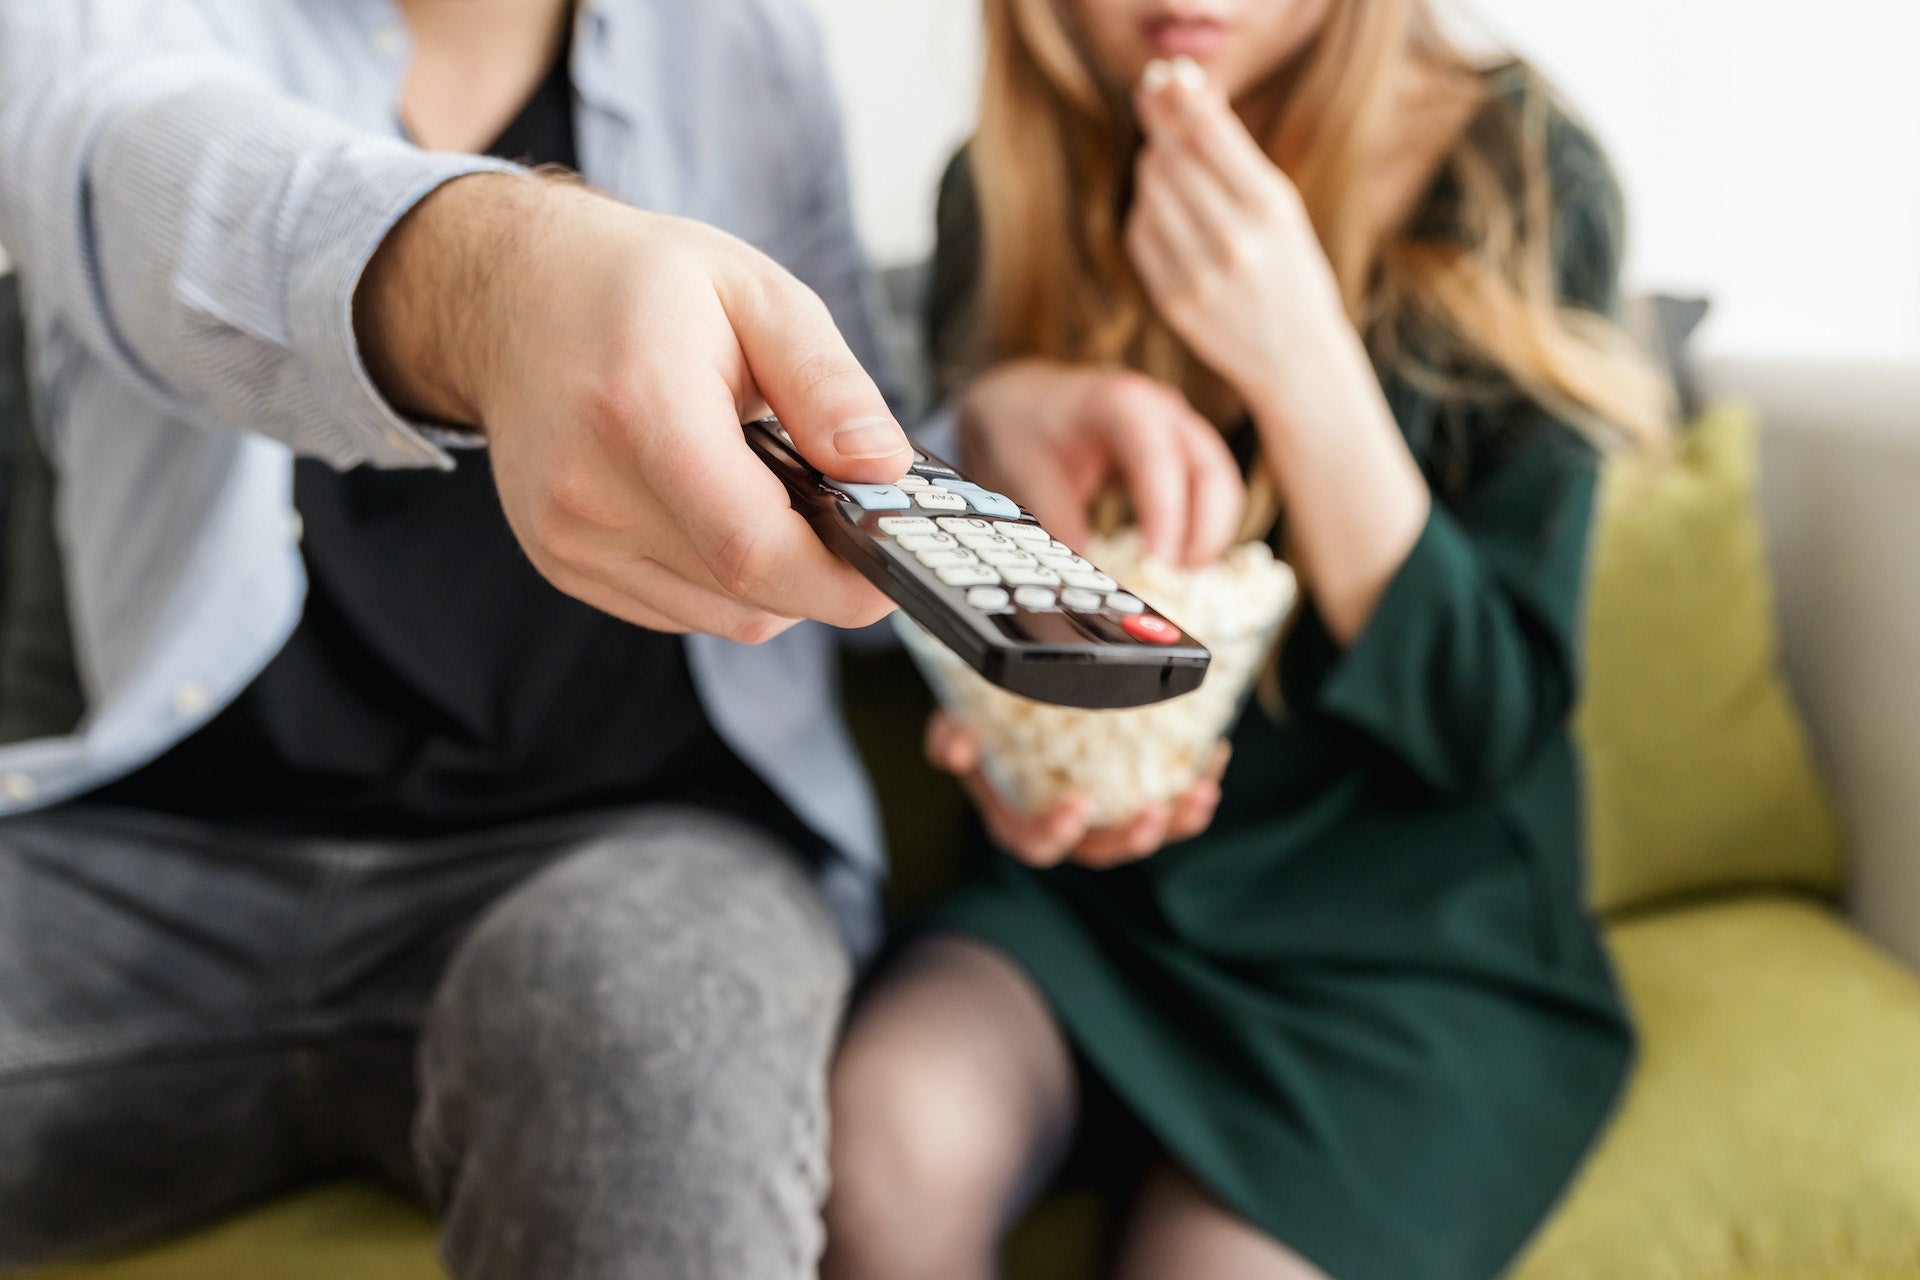 Couple watching a movie together. Man has remote control in his hand.